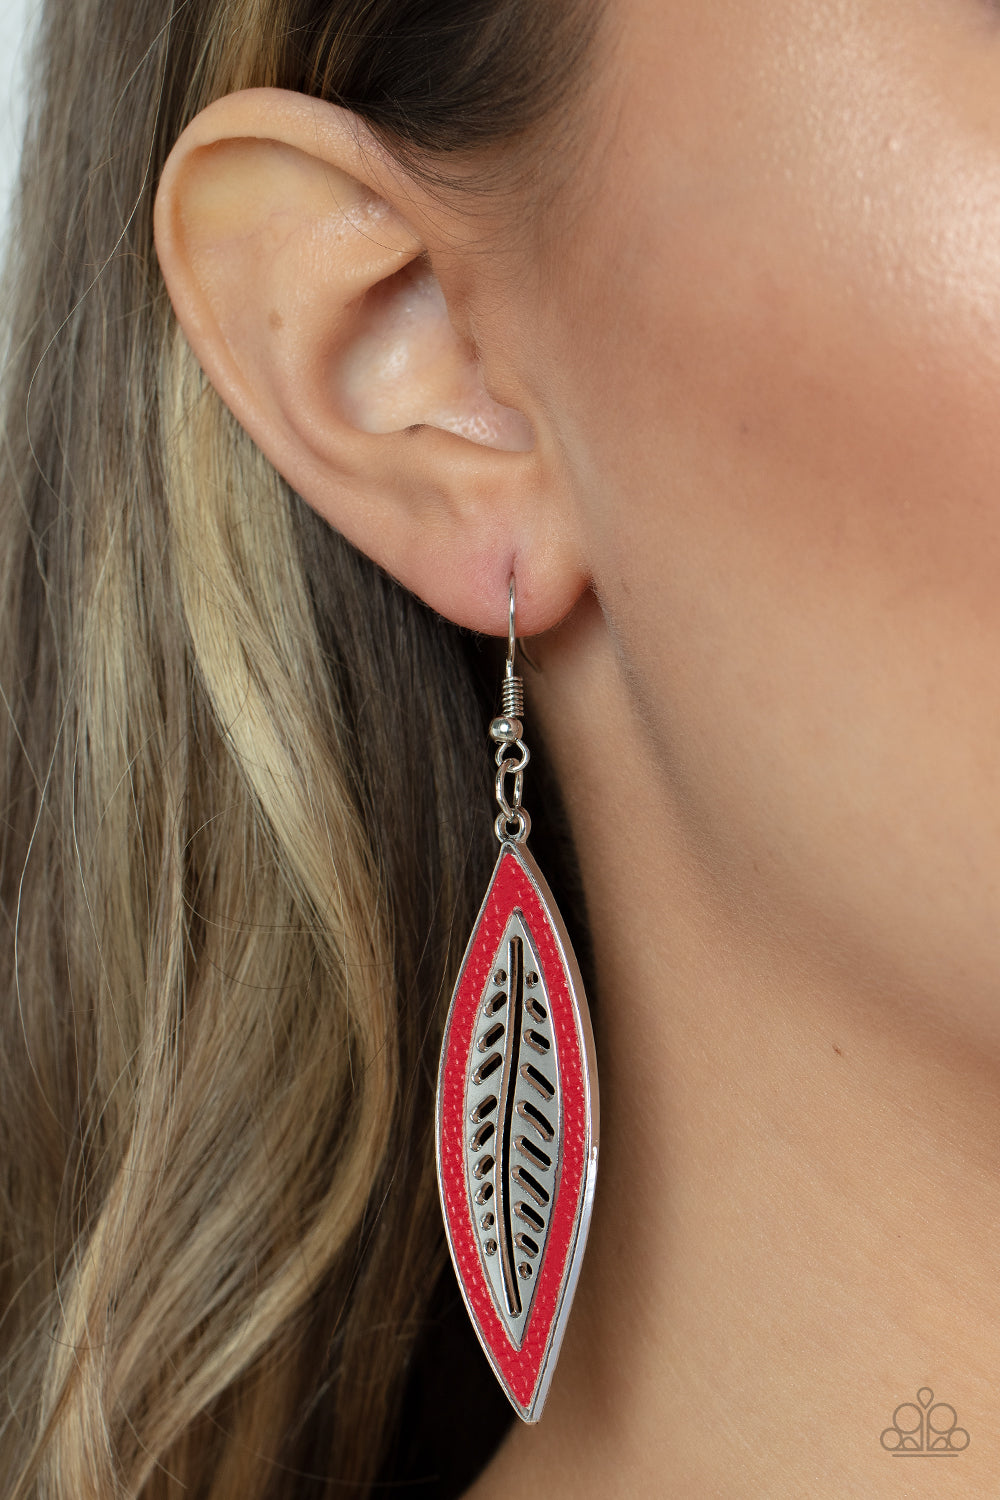 Leather Lagoon - Red Leather - Silver Leaf Earrings - Paparazzi Accessories - Bordered in a red leather trim, an airy silver leaf frame swings from the ear for a wildly seasonal fashion earrings. Earring attaches to a standard fishhook fitting. Sold as one pair of earrings.